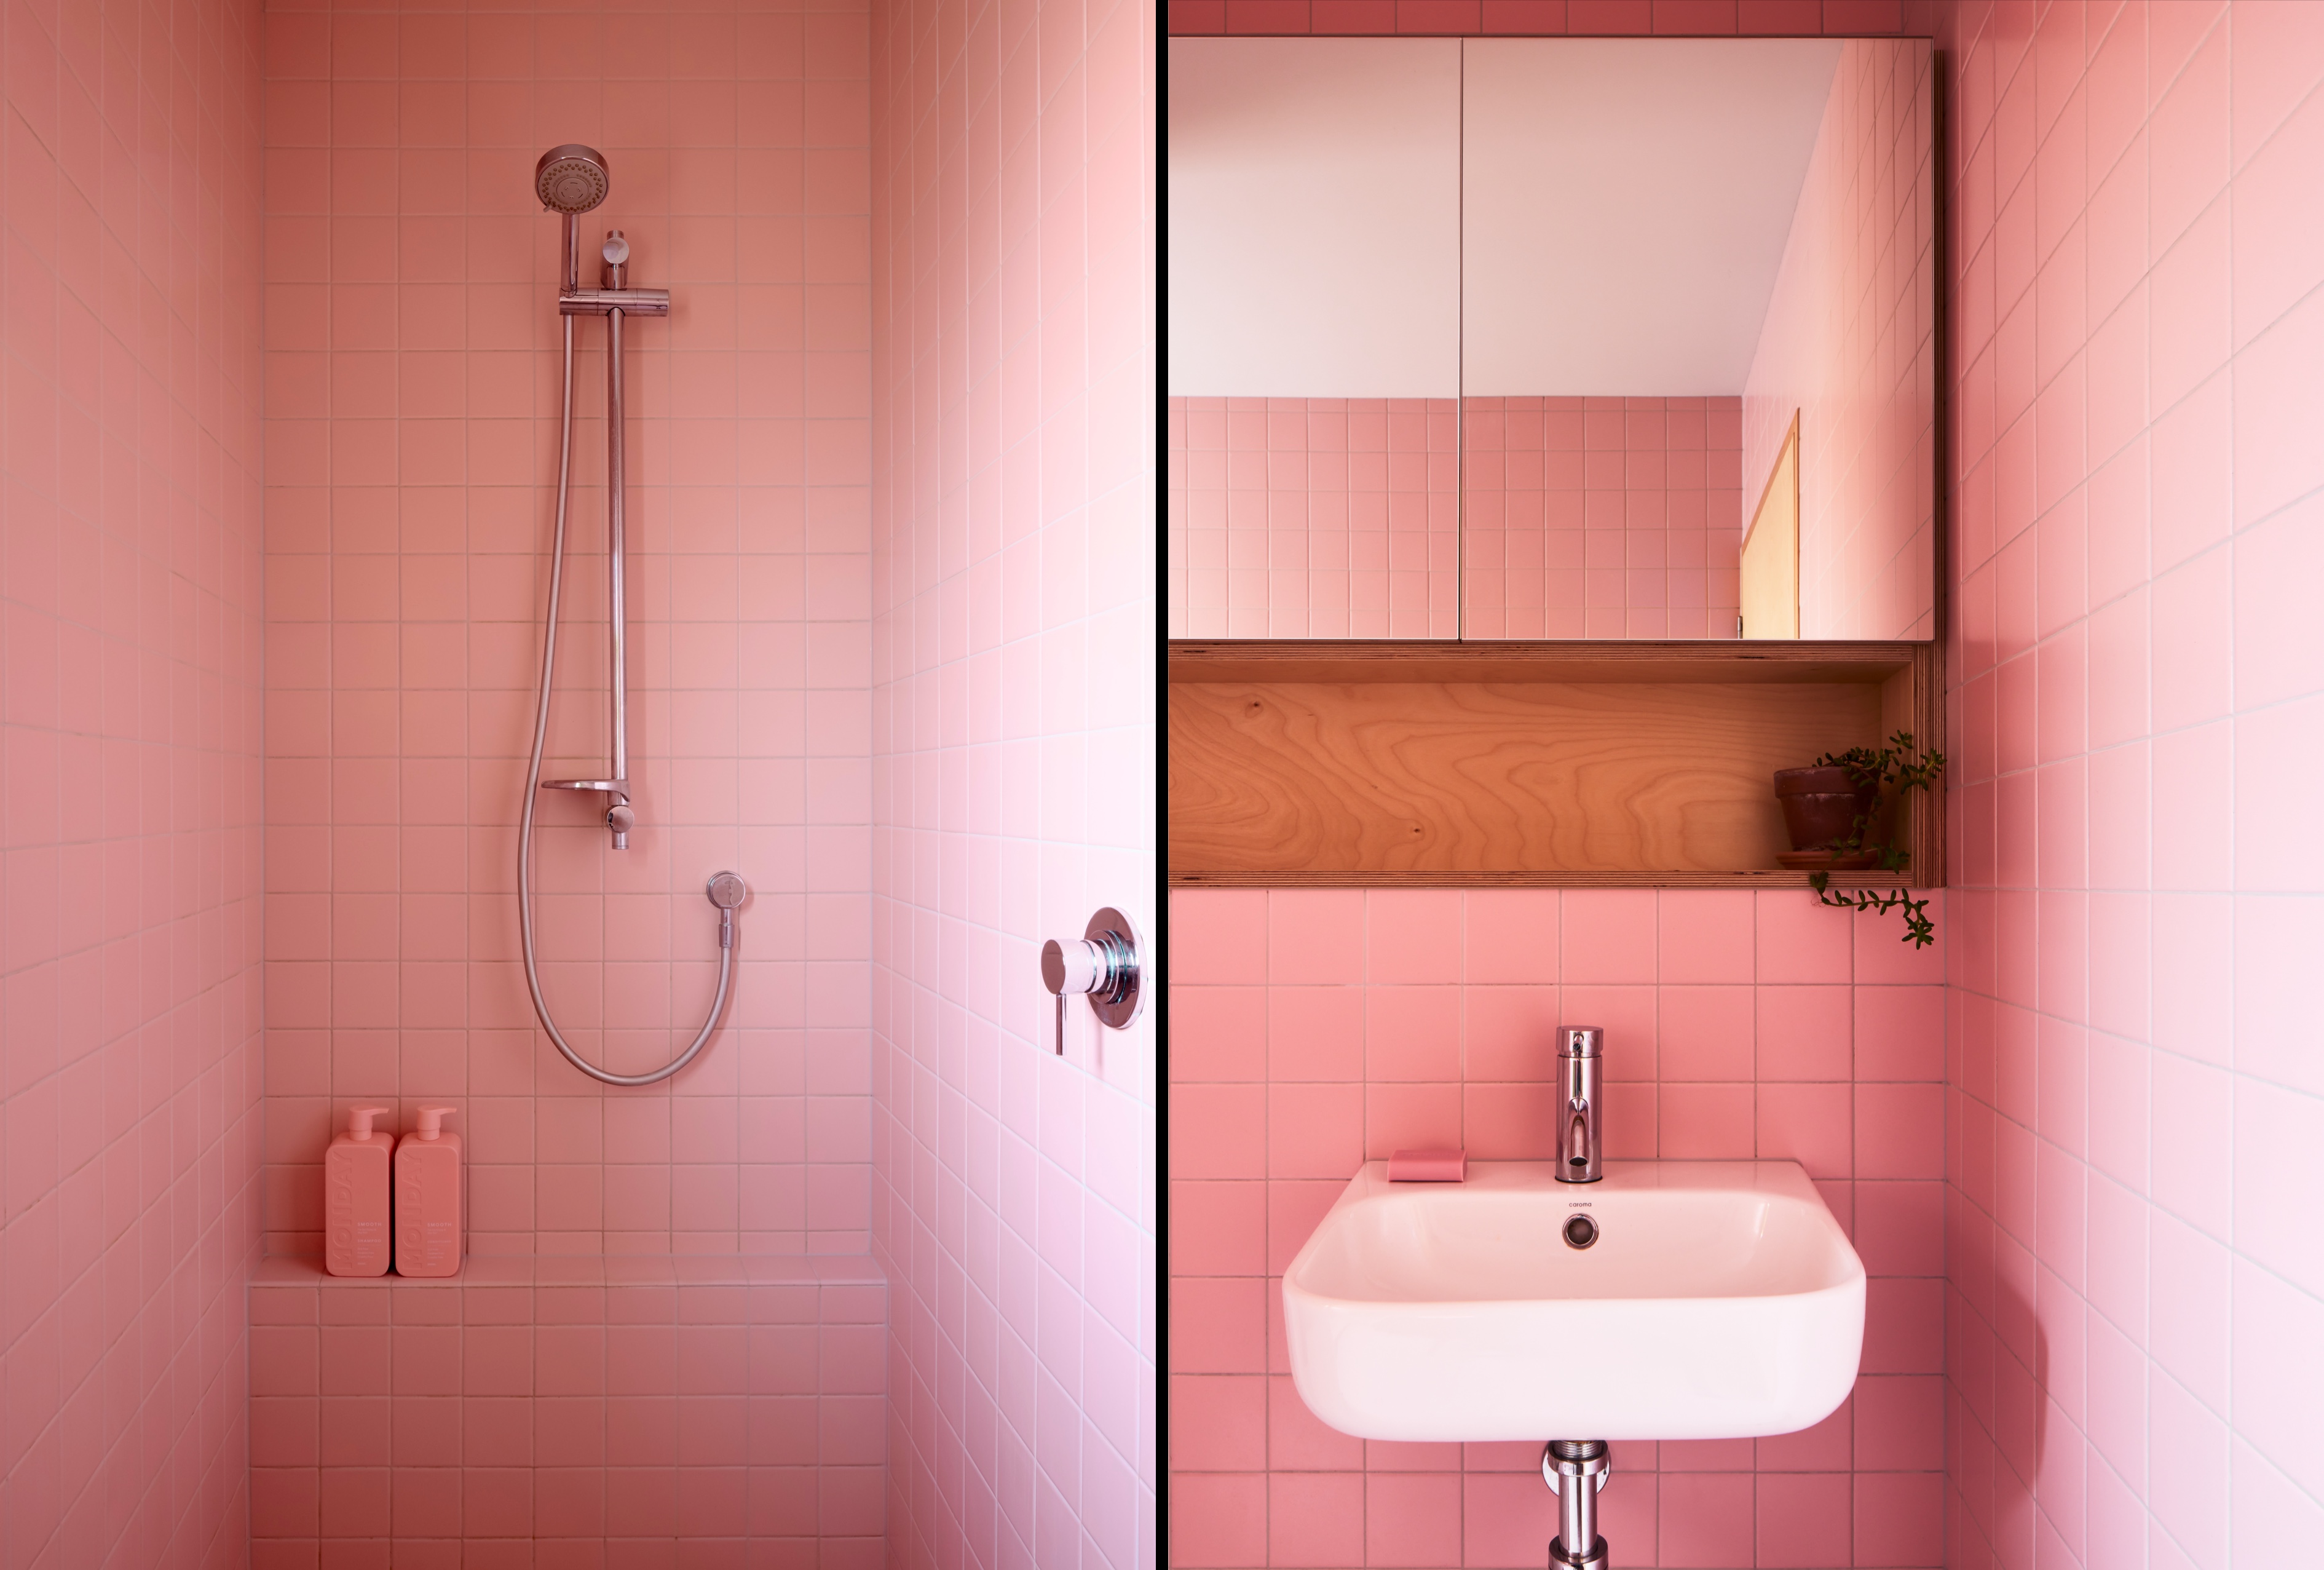 Split image. Left side shows shower with pink bathroom tiling. Right side shows bathroom sink and mirror with pink tiling.